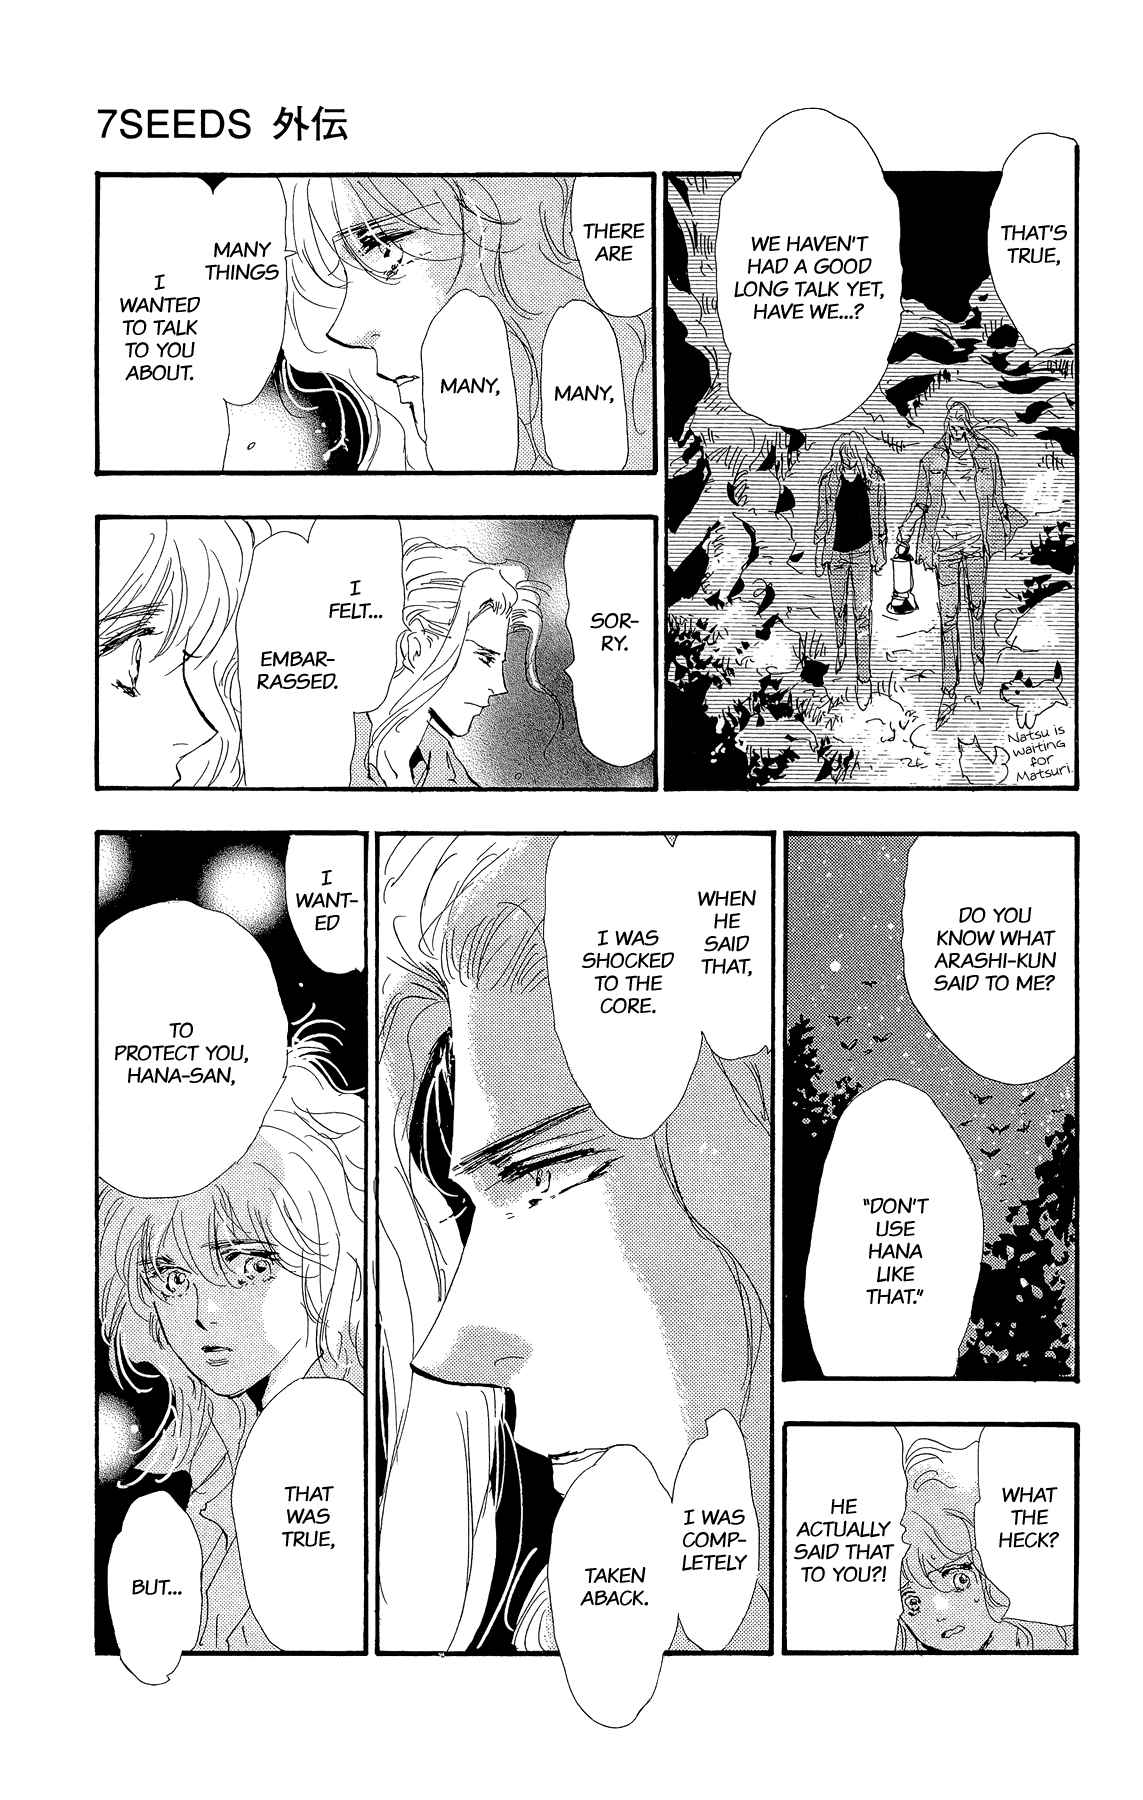 7 Seeds Gaiden Vol. 1 Ch. 2 Middle [Fate of the Seeds]